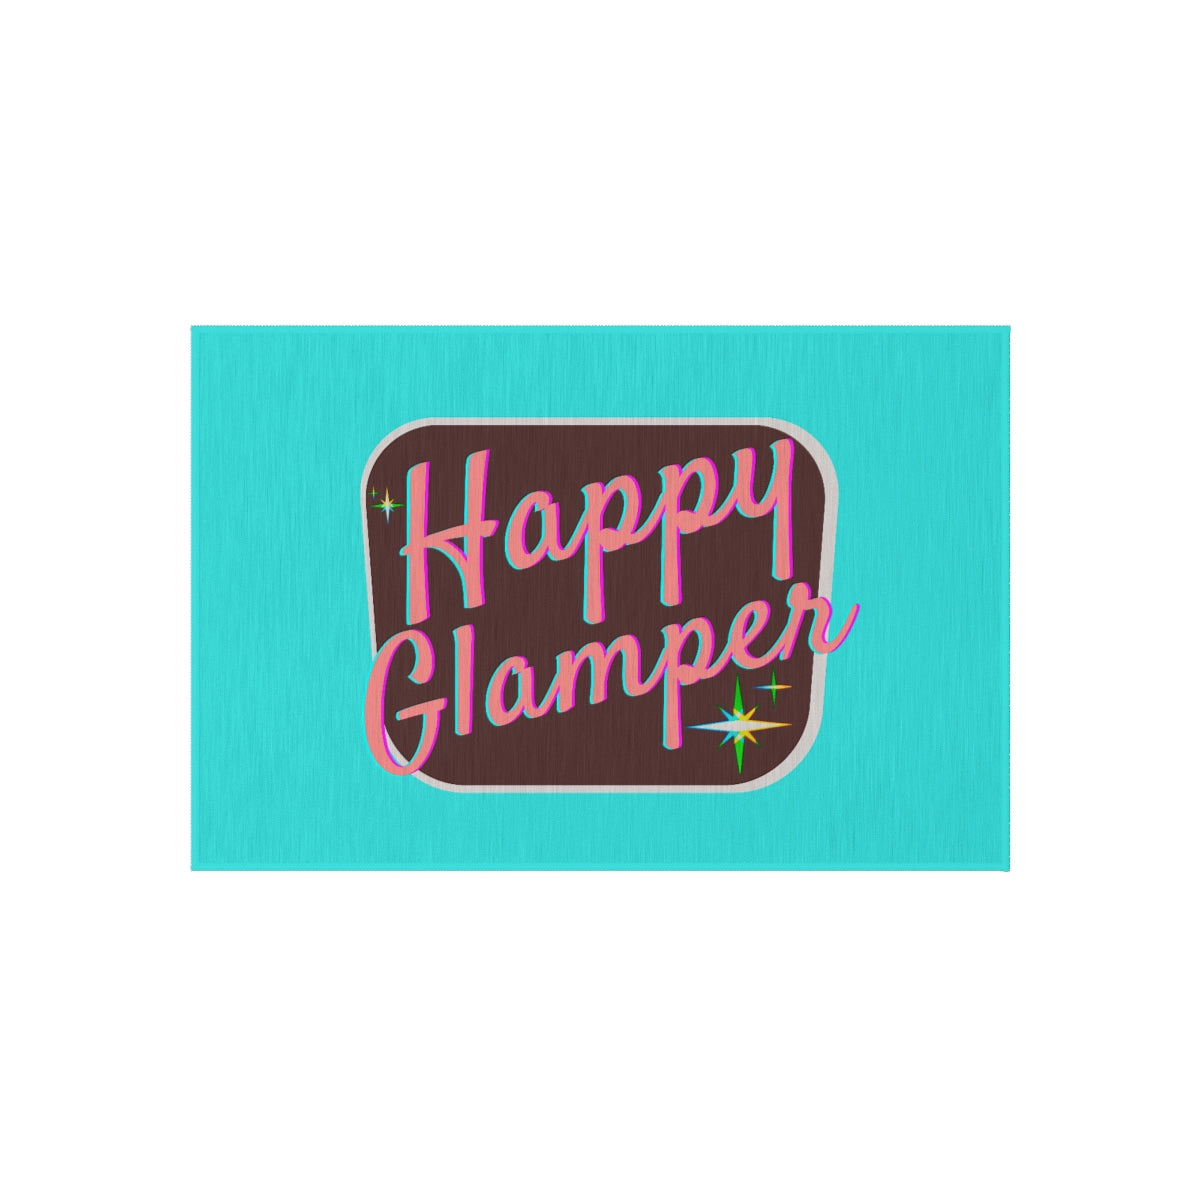 Green Happy Glamping Rug for Your Camper Van, Tent, or RV